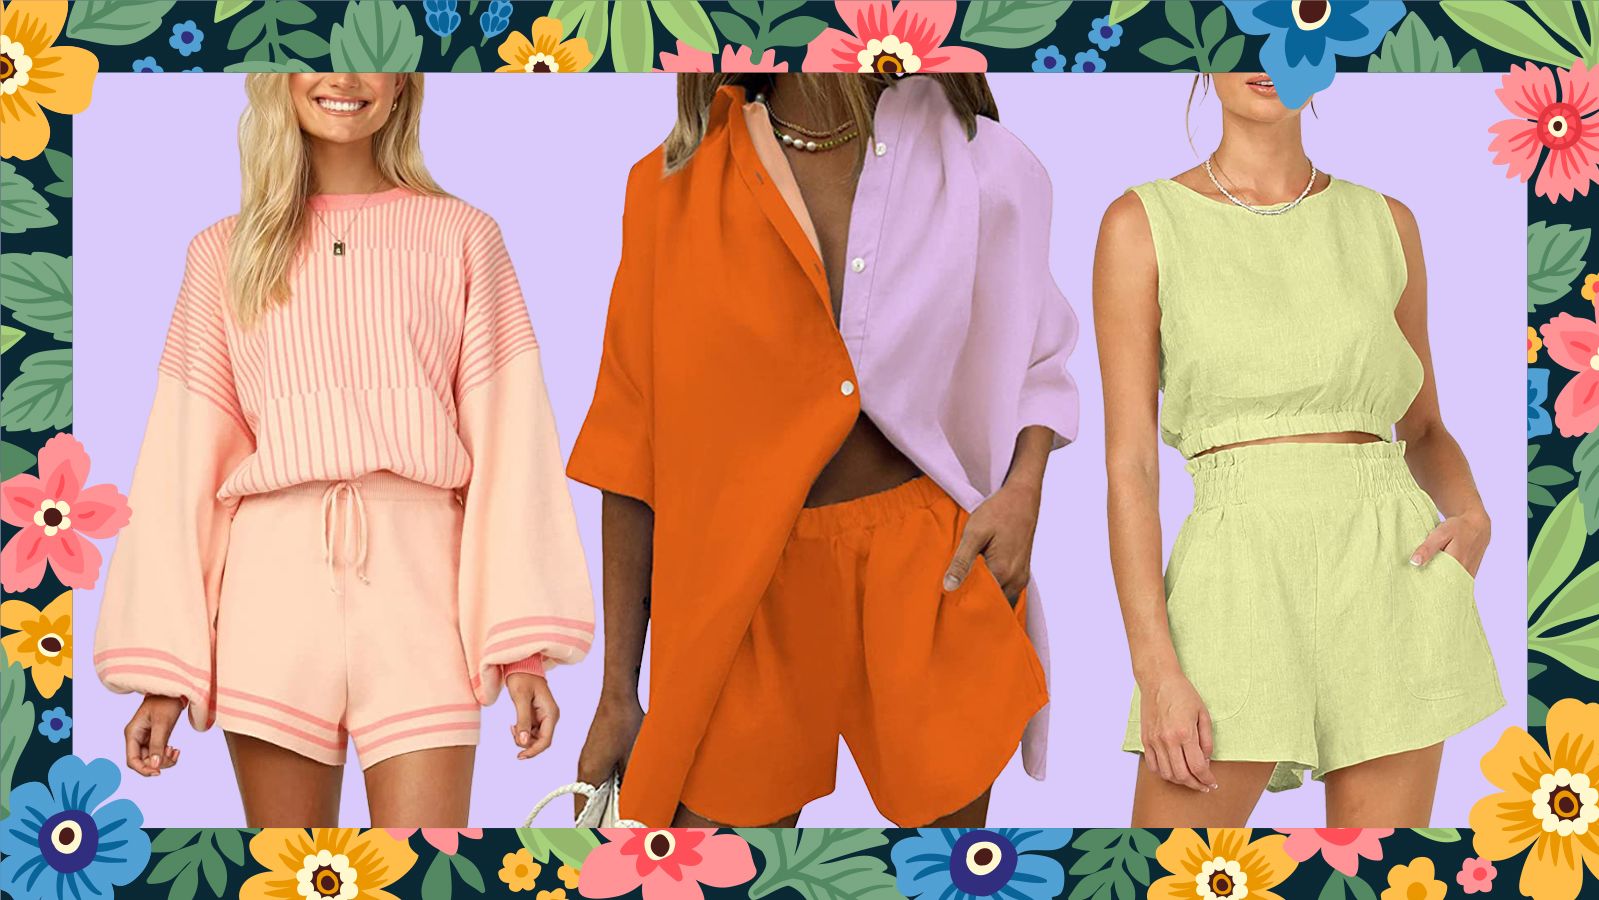 22 Loungewear Sets You'll Want To Live In